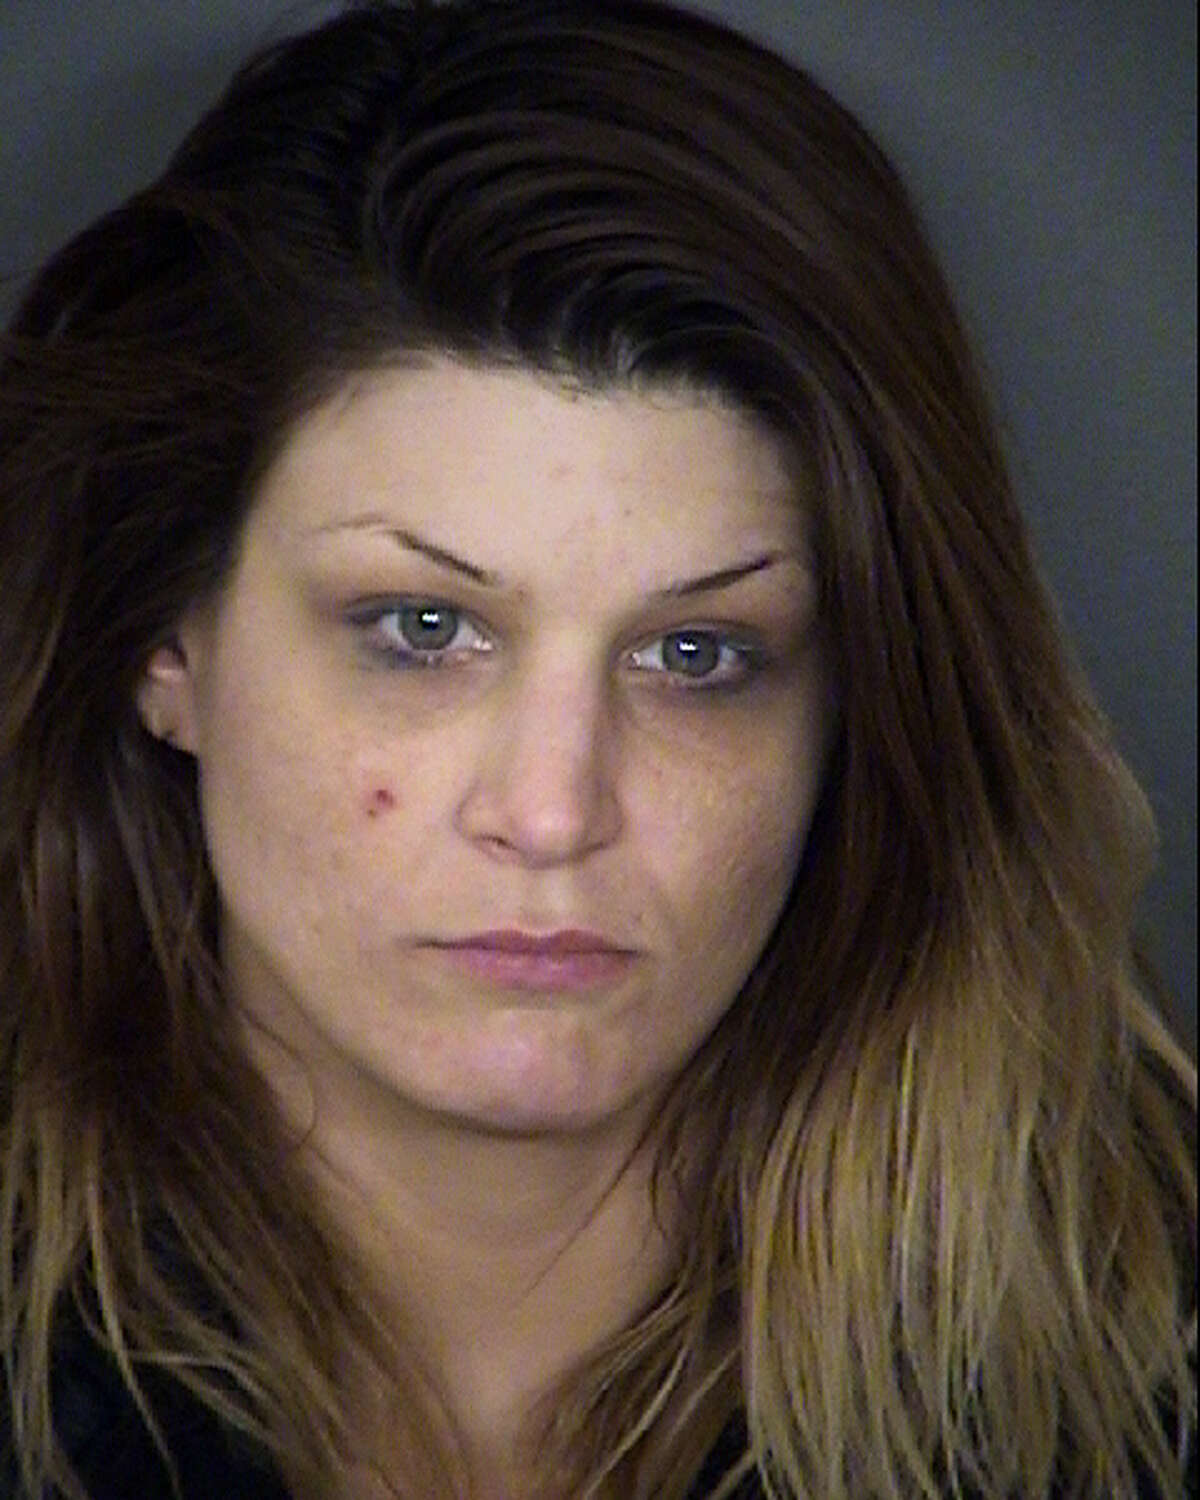 Crystal Doran faces a charge of fraudulent use or possession of more than 50 items of identifying information, a first-degree felony. She remains in the Bexar County Jail.